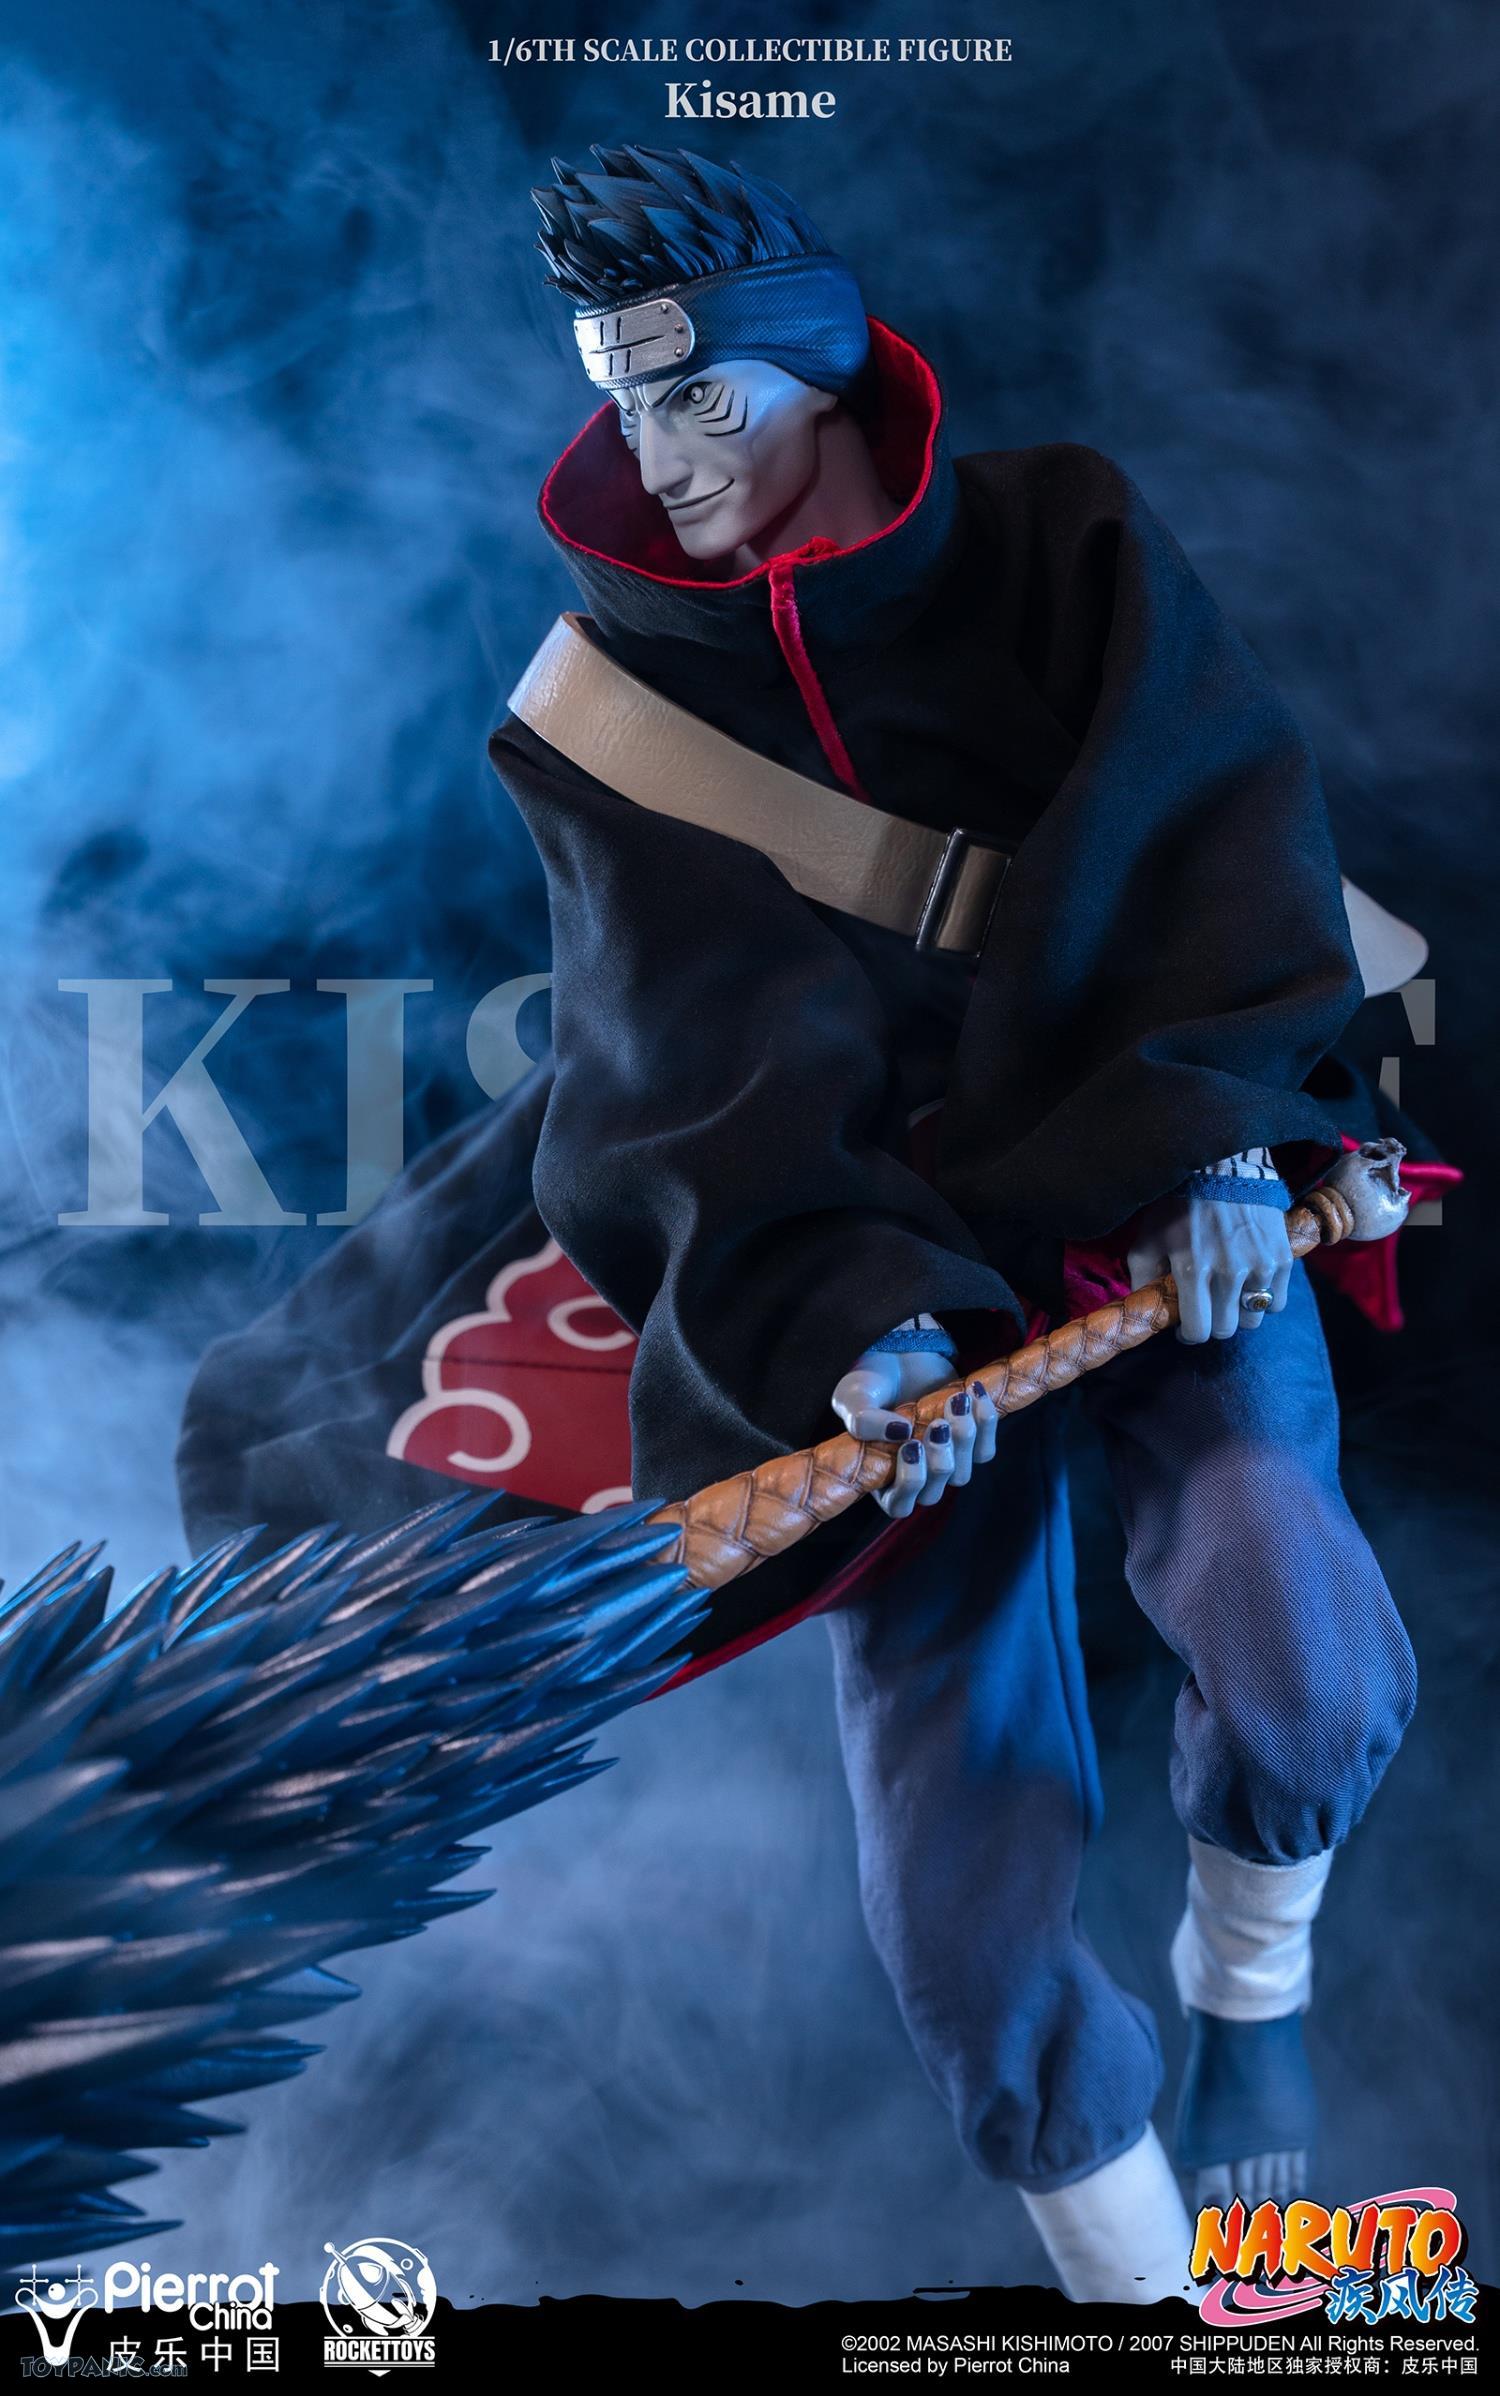 male - NEW PRODUCT: Rocket Toys ROC-007 1/6 Scale Kisame 221202460436PM_2163868